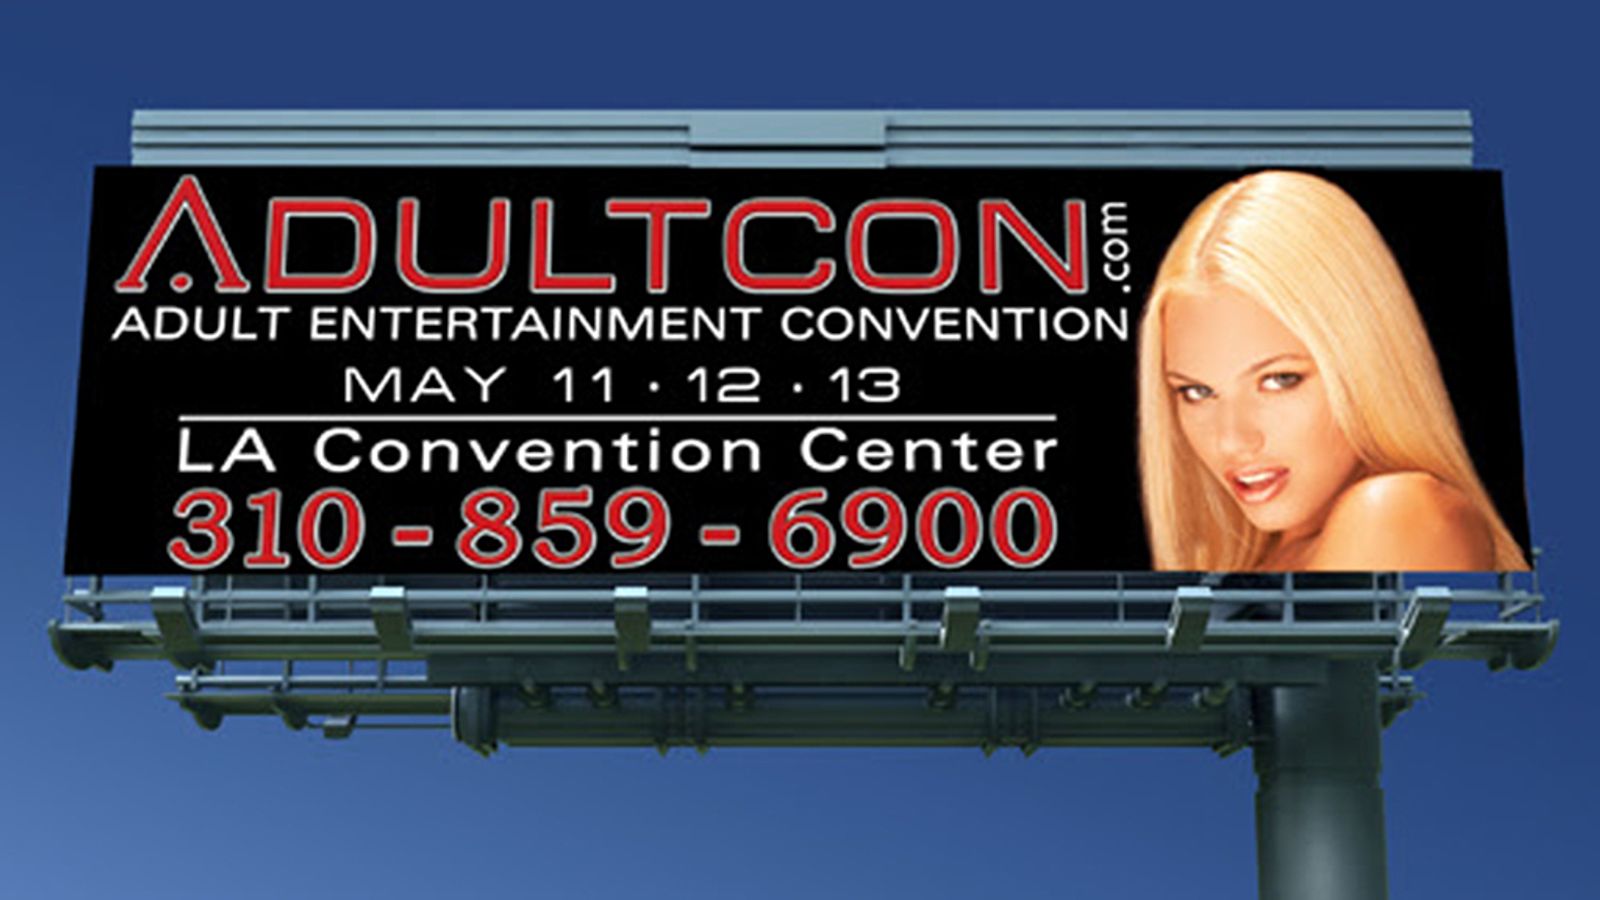 Adultcon Returns To LA Convention Center May 11-13